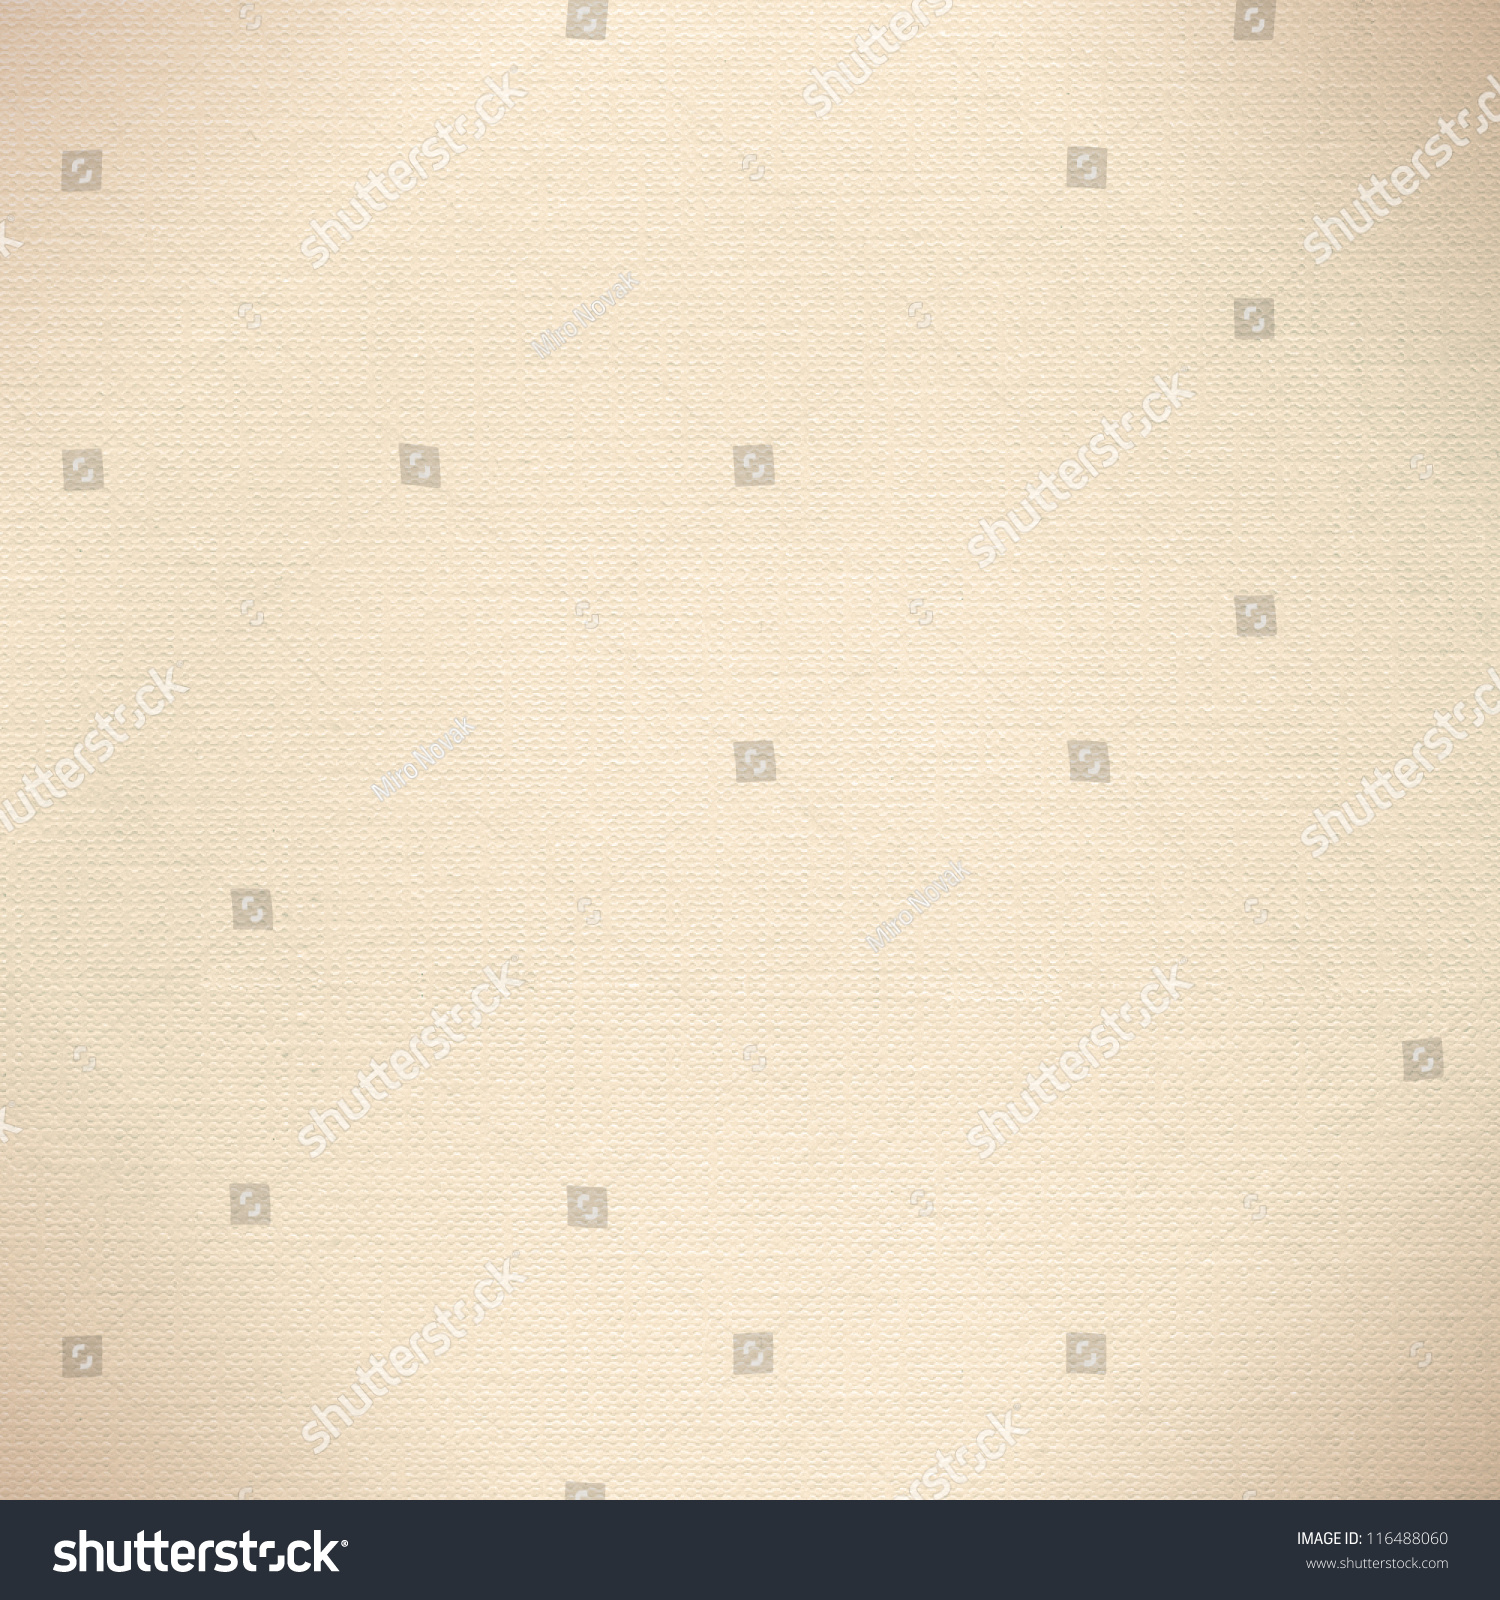 Sepia Paper Texture Background Soft Pattern Stock Photo (Edit Now ...